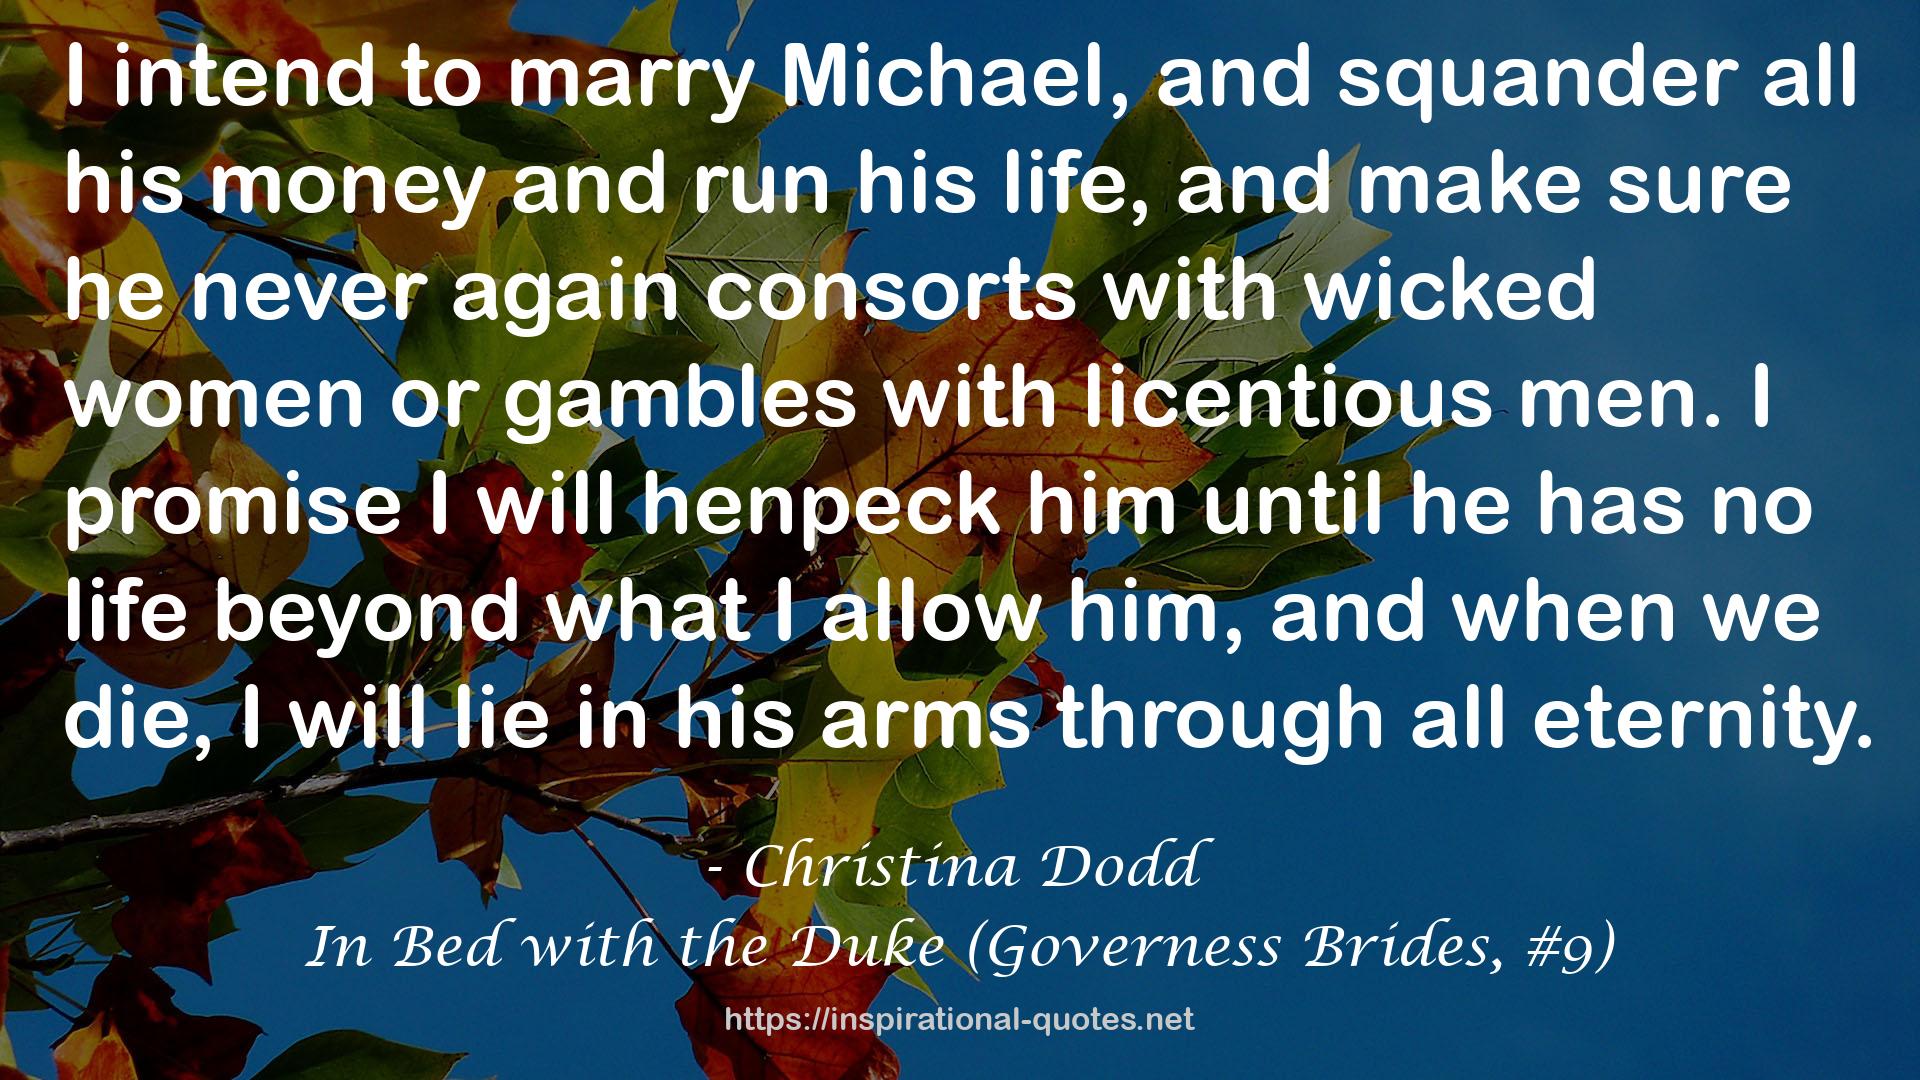 In Bed with the Duke (Governess Brides, #9) QUOTES